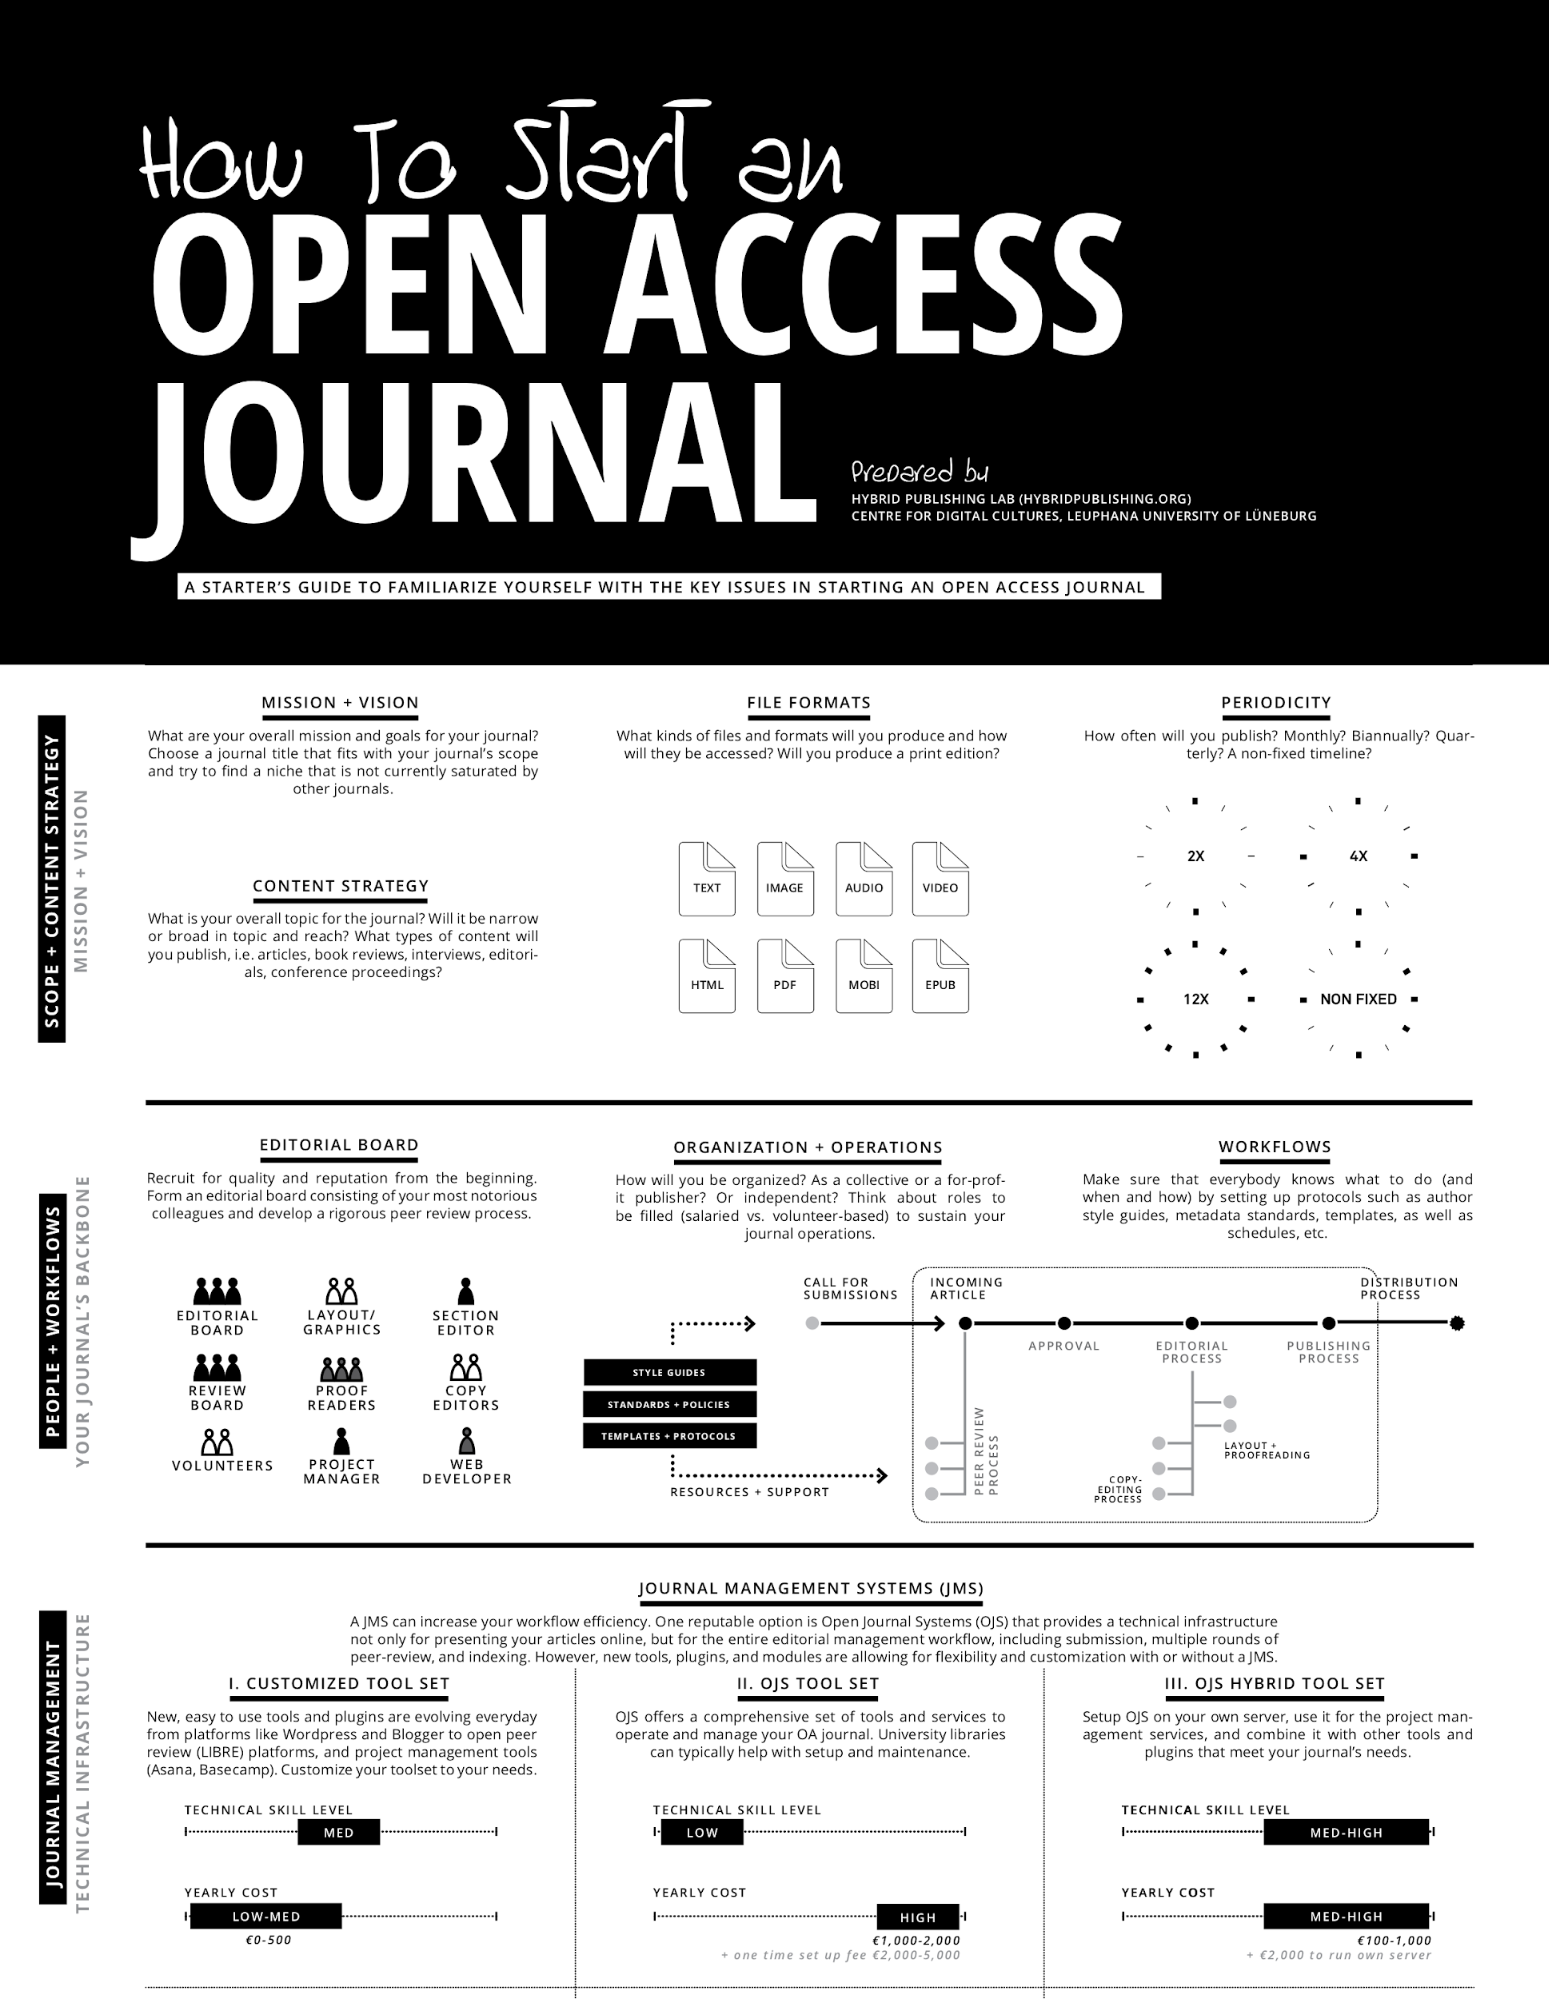 Infographic on starting an Open Access journal.